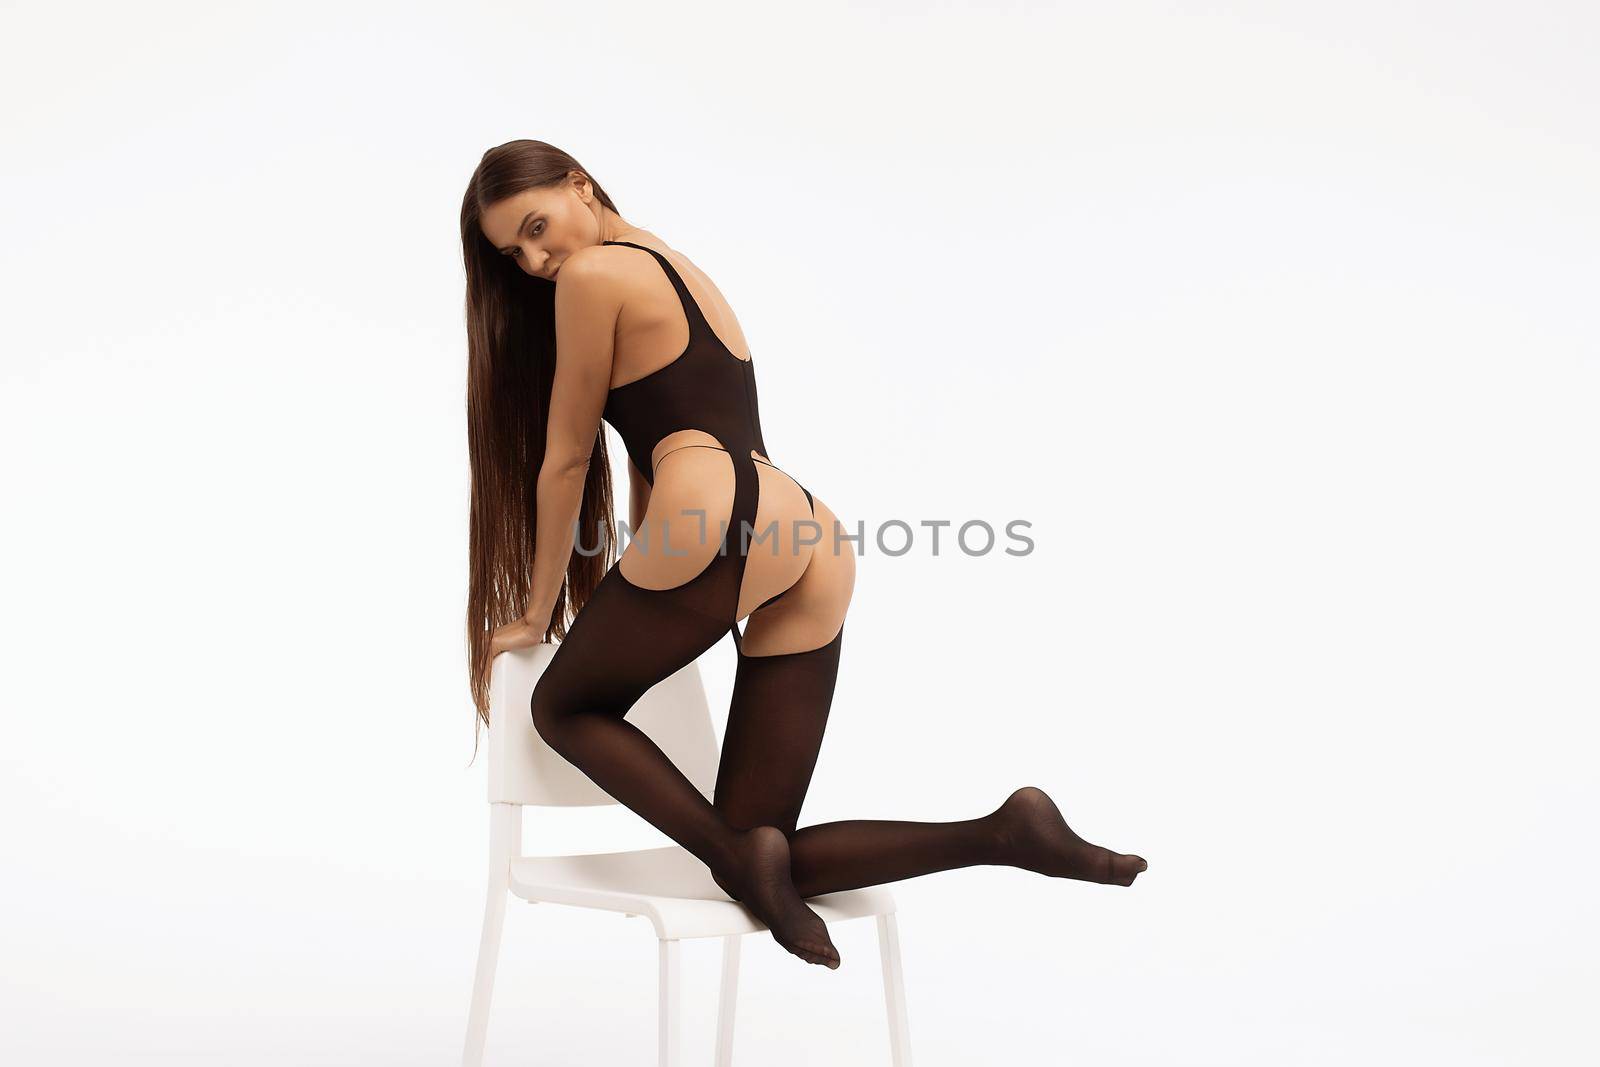 Full body of sexual unrecognizable female model in black lingerie with stockings leaning on chair against white background in light studio